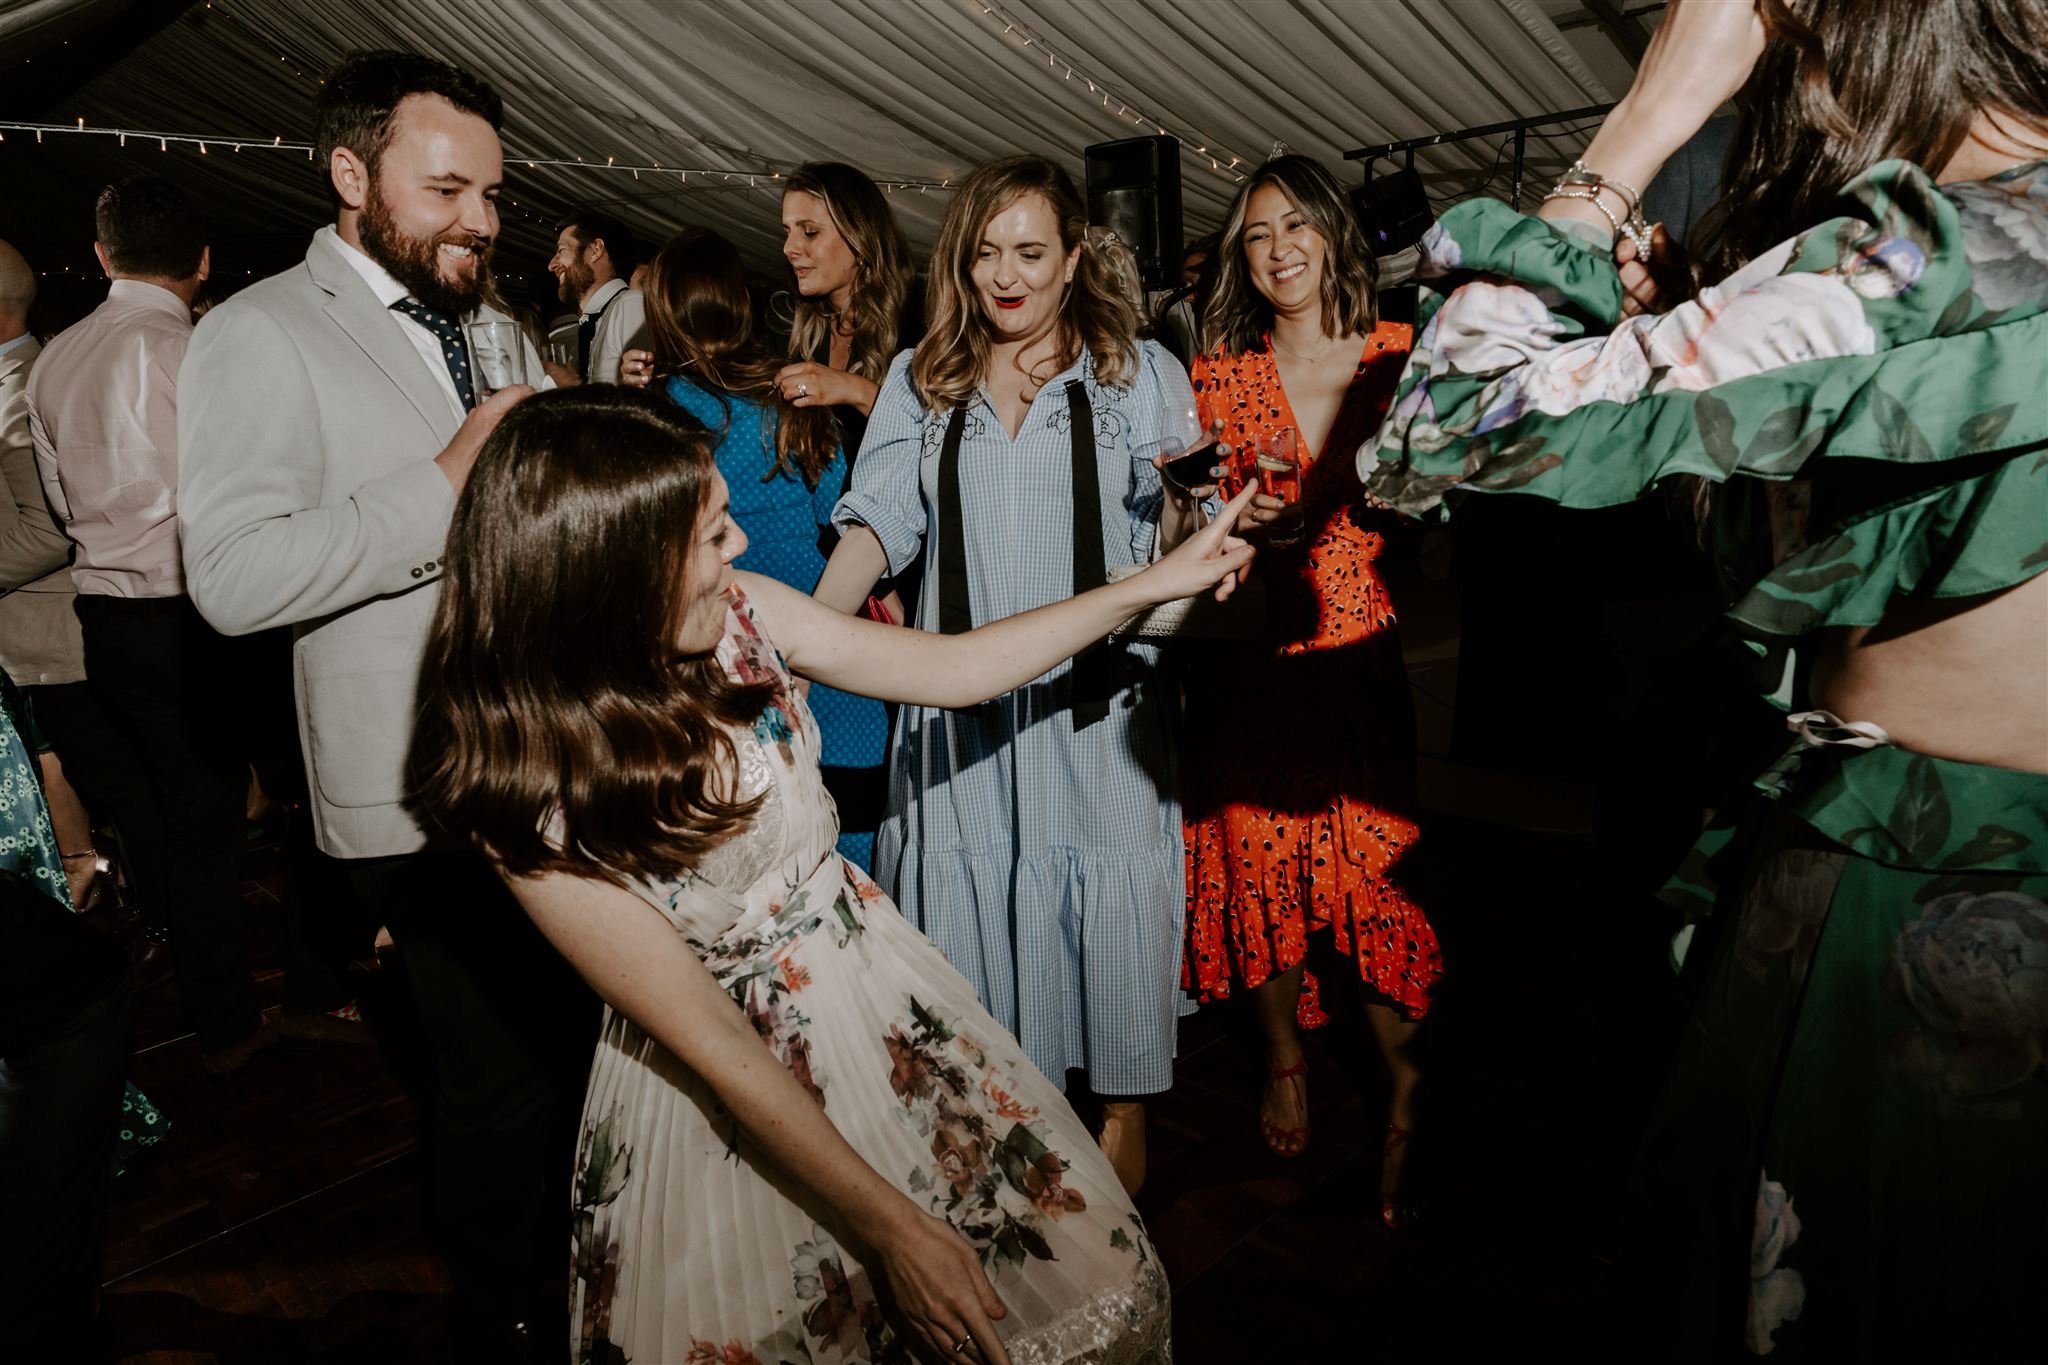 wedding guests dancing documentary wedding photographs Aswarby Rectory